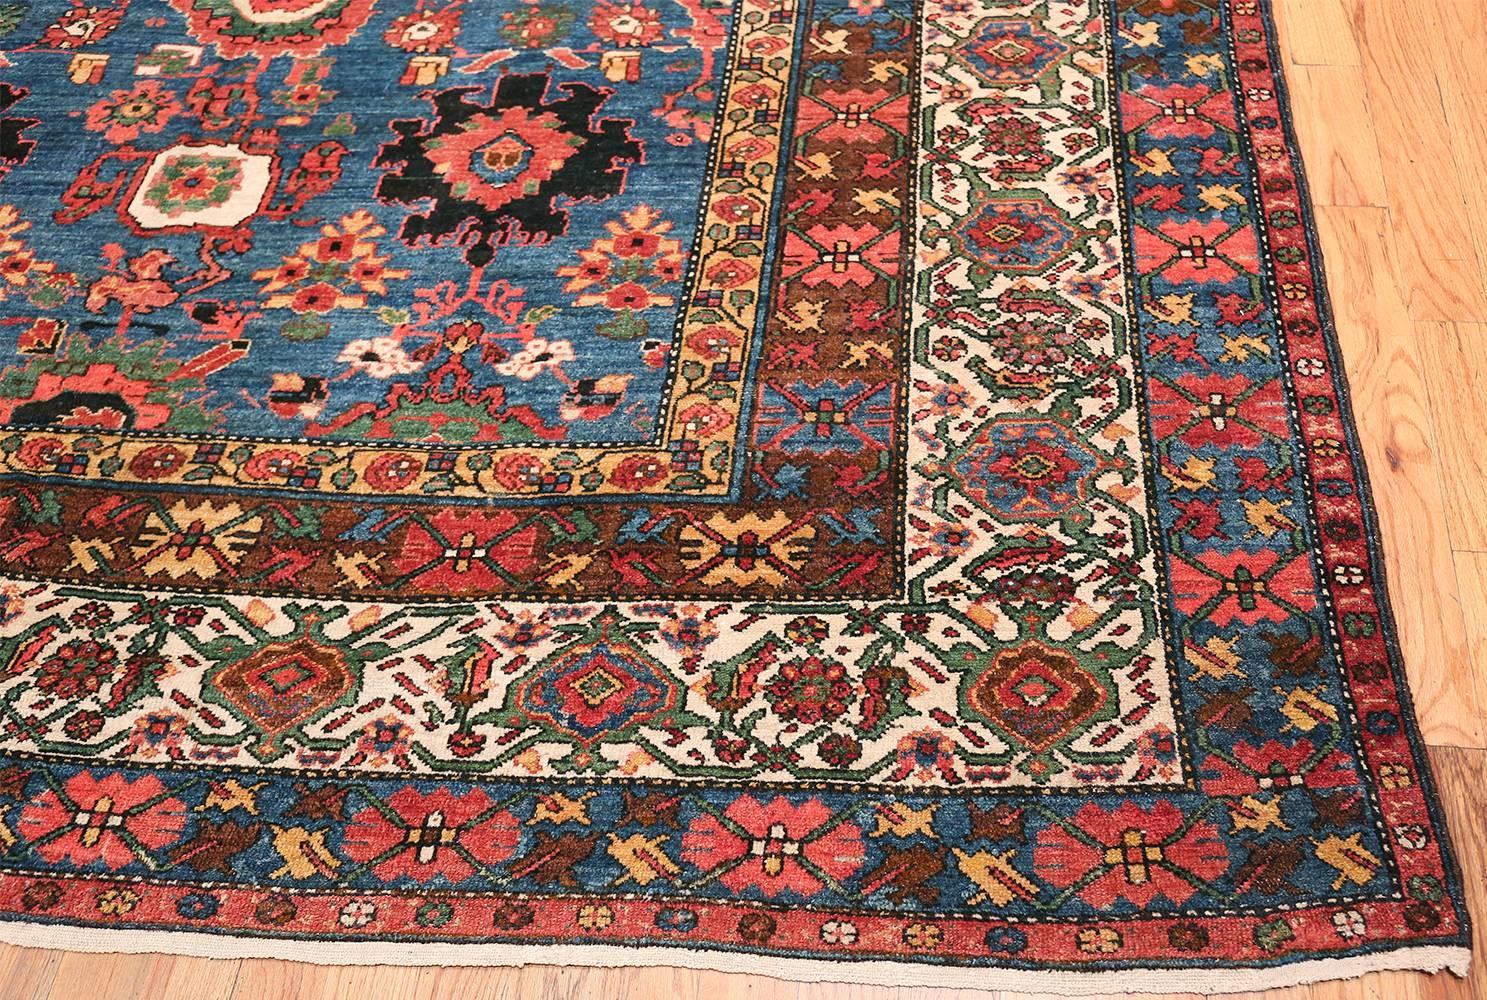 19th Century Nazmiyal Antique Oversized Persian Malayer Rug. Size: 14 ft 6 in x 20 ft 6 in